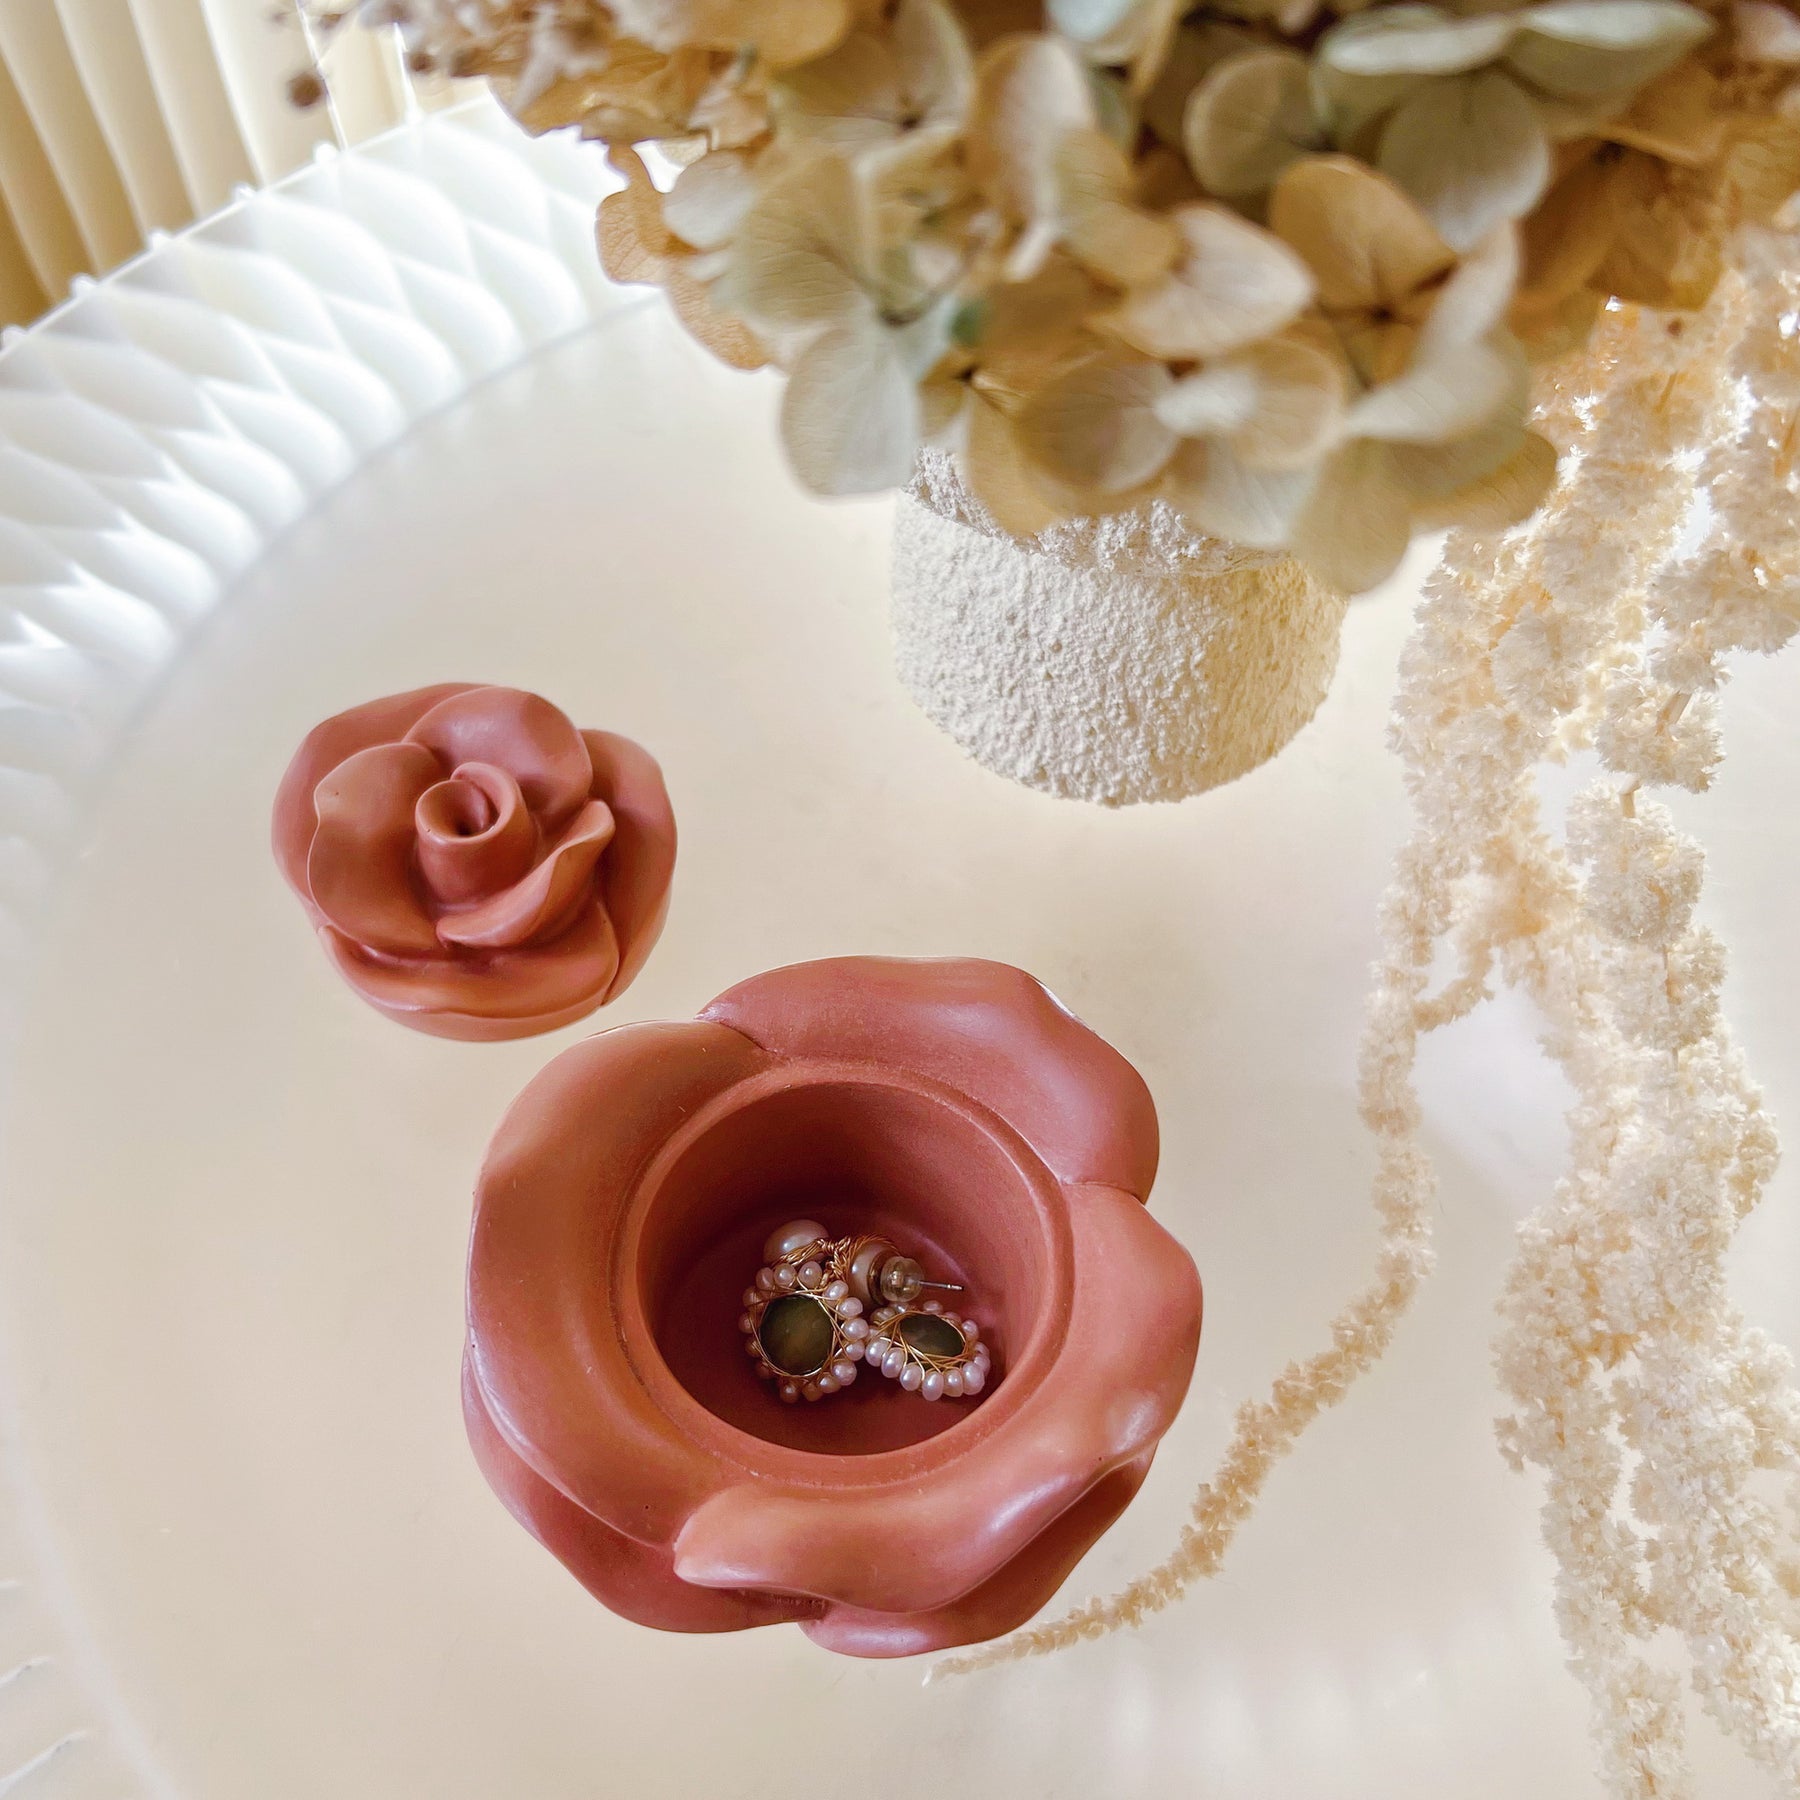 Handcrafted Rose and Tulip Flower Shaped Trinket Box | LMJ Candles